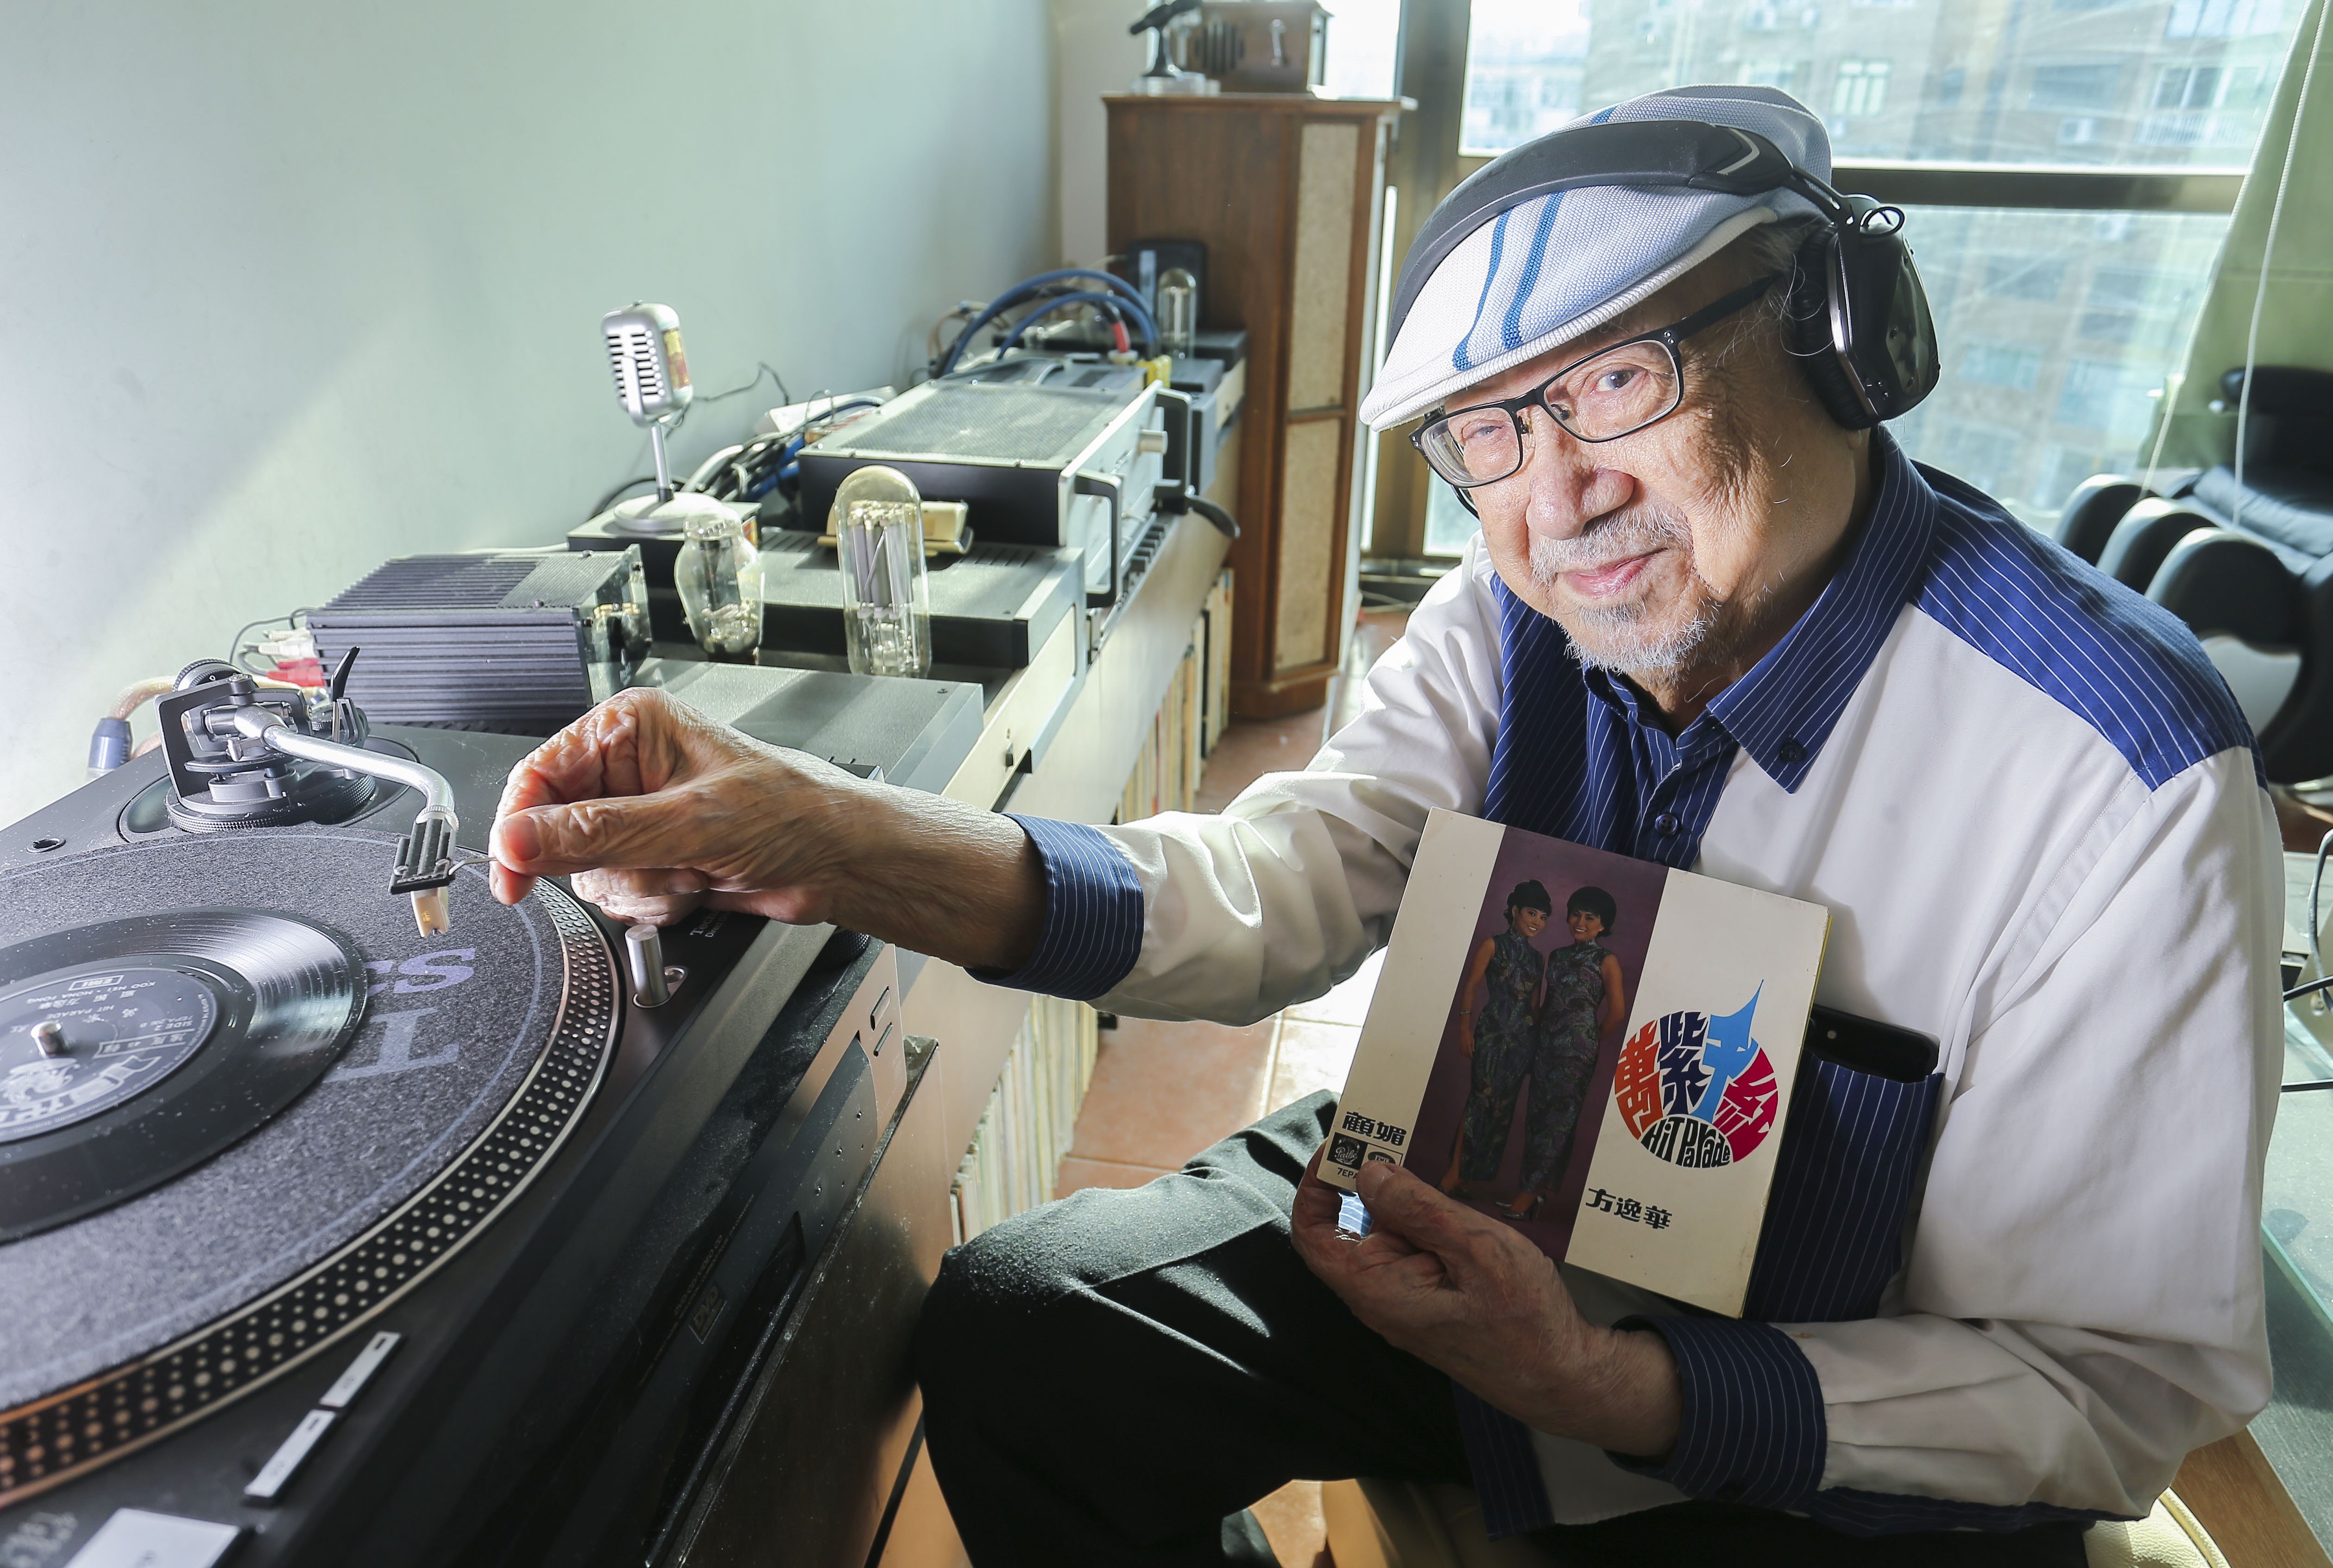 ‘Uncle Ray’ plays a vinyl record given to him by late singer and friend Mona Fong. Photo: Dickson Lee